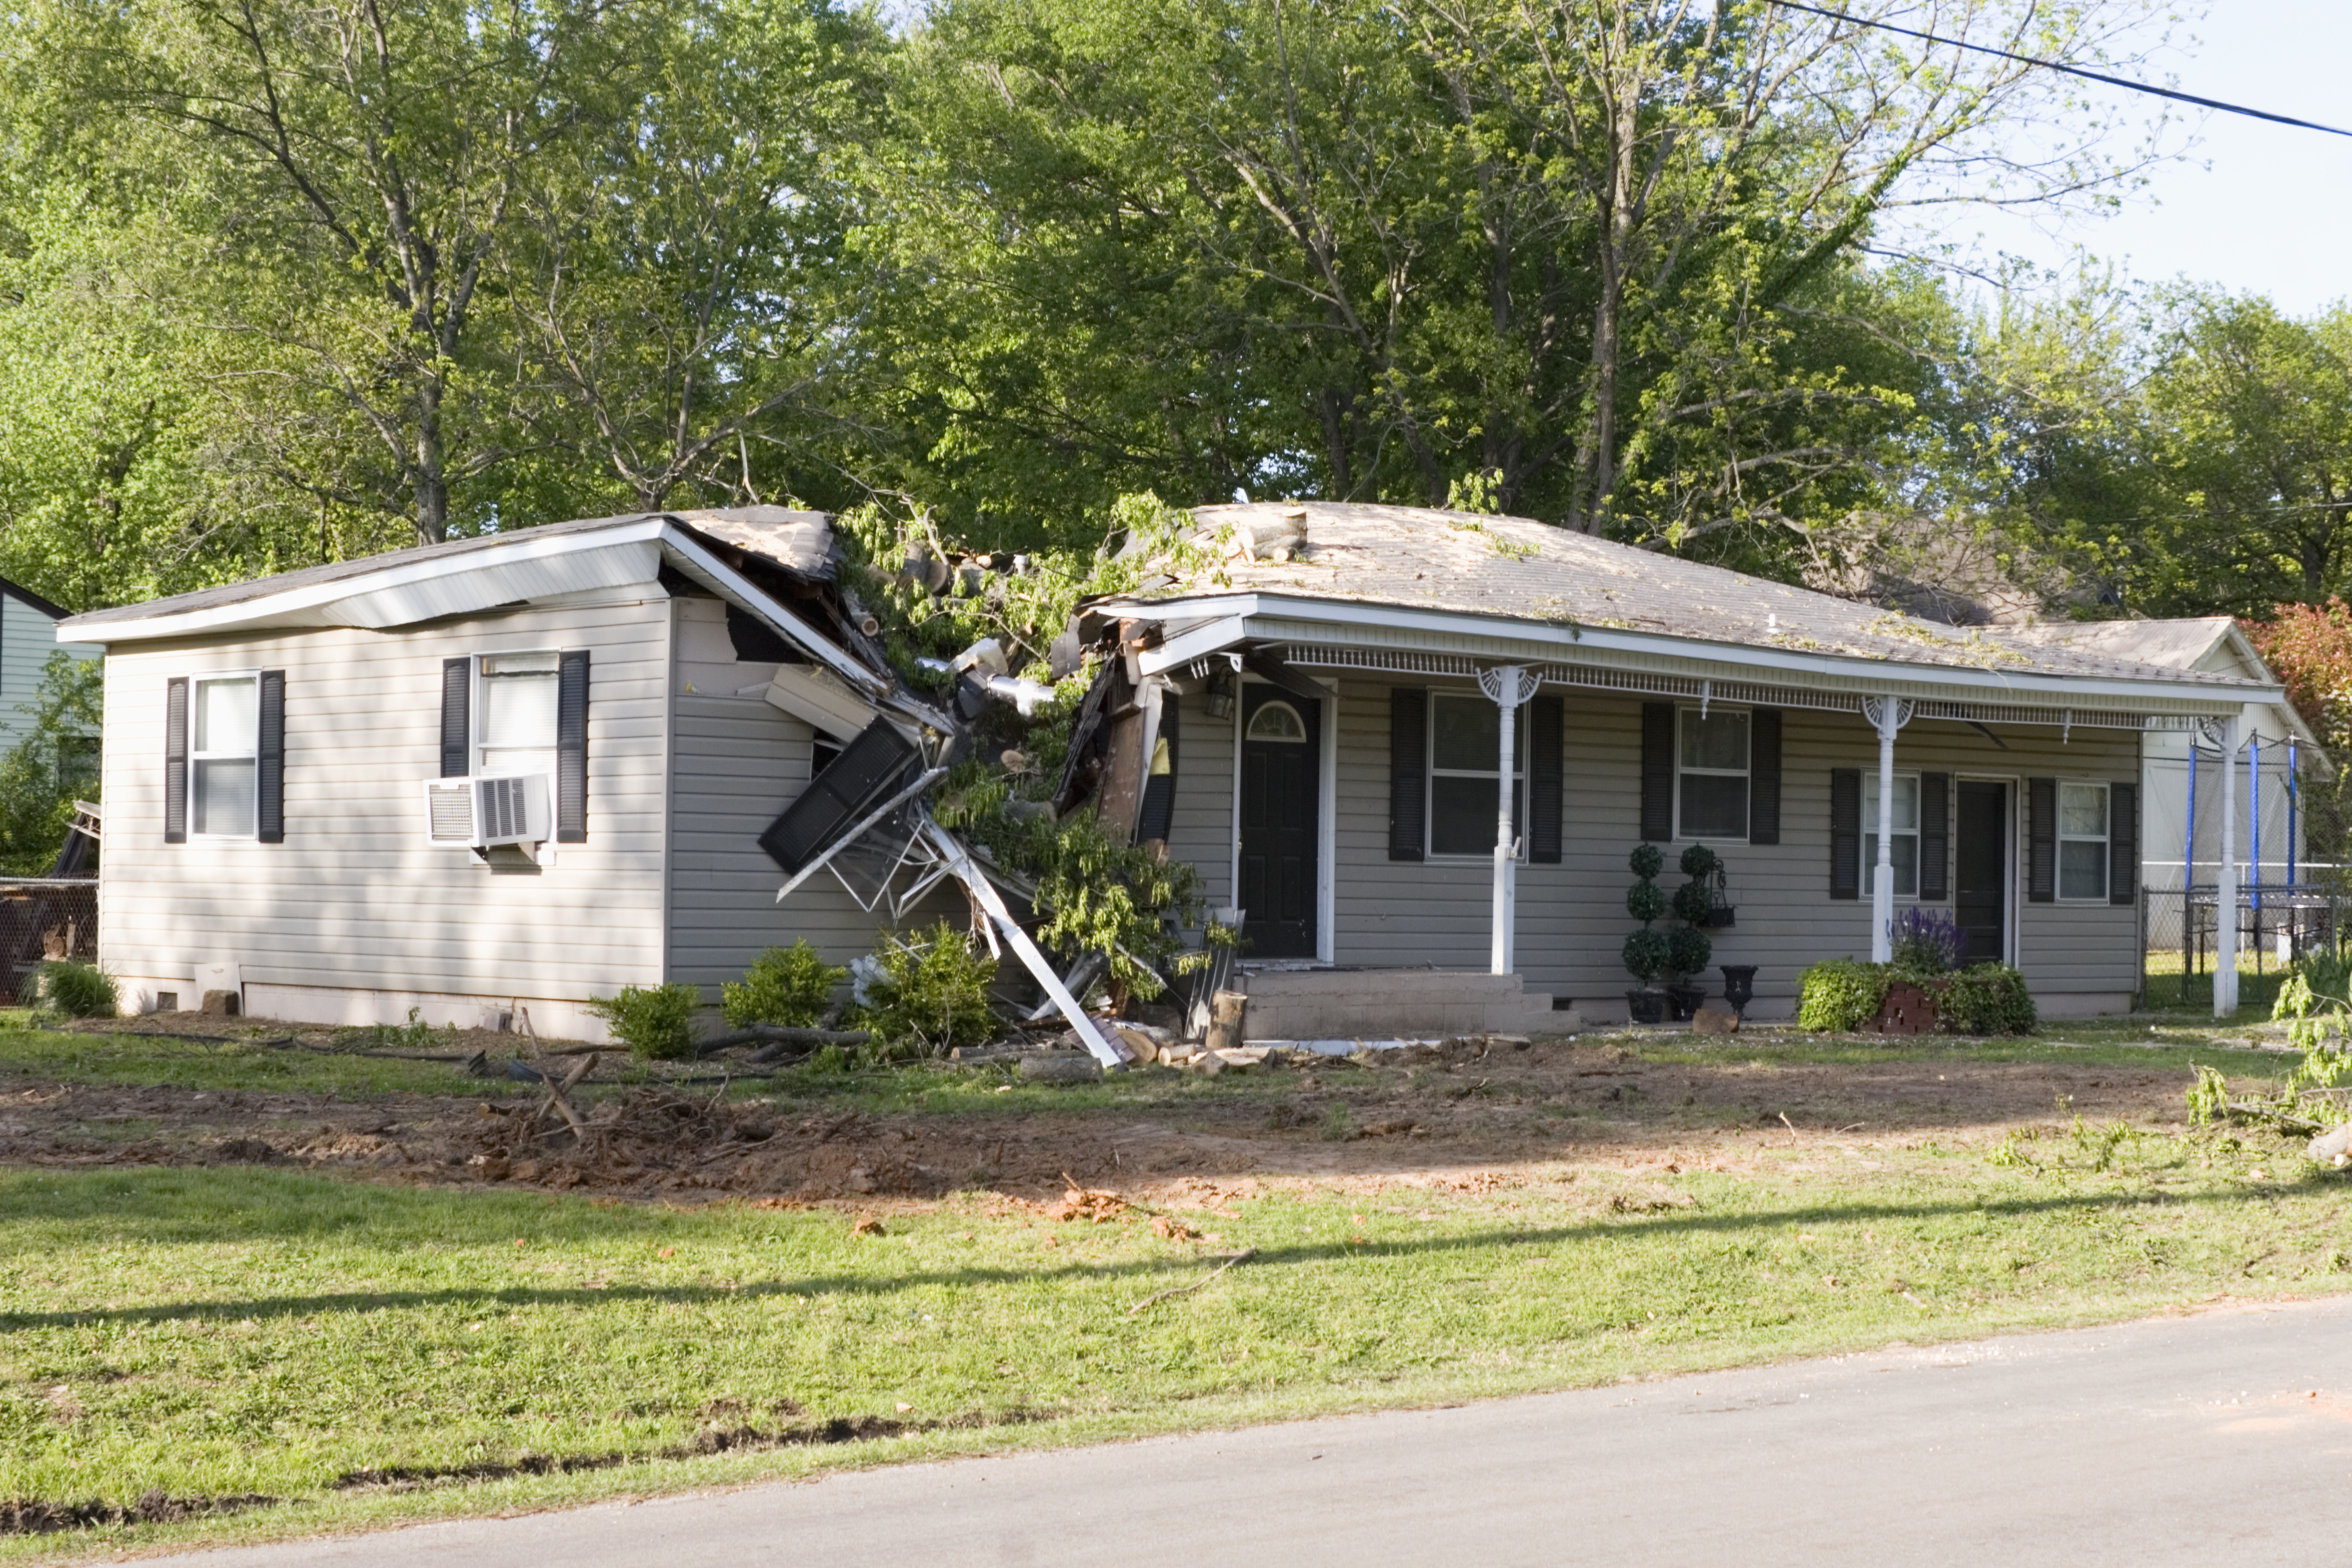 Storm damage on a home, involving a tree that crashed through a roof